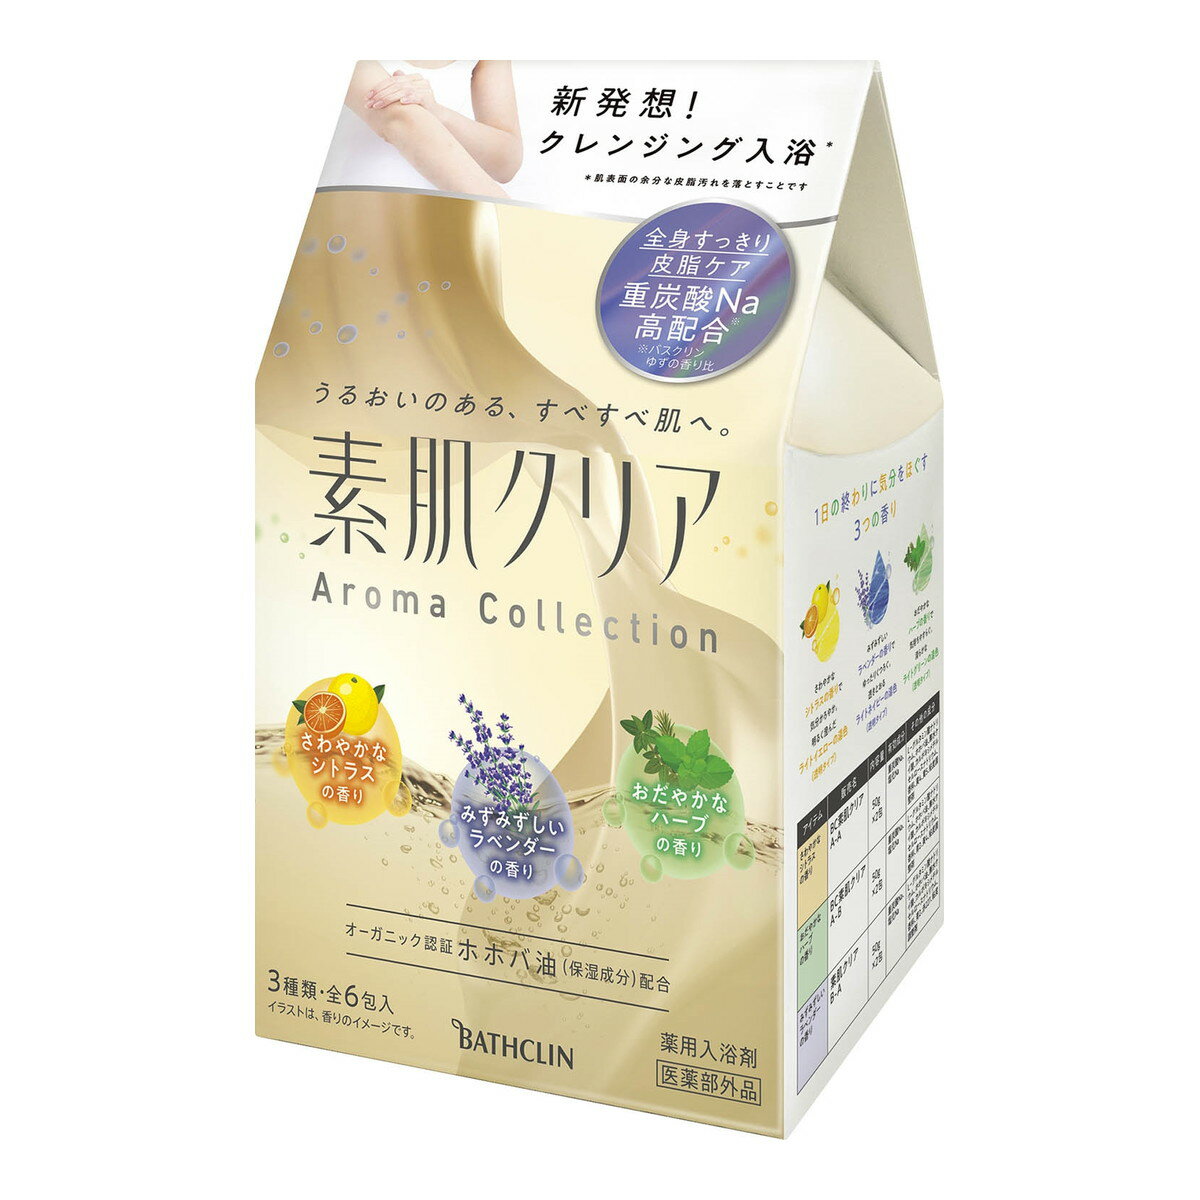 【A商品】 3～5個セット まとめ買い バスクリン 薬用入浴剤 素肌クリア Aroma Collection 粉末入浴剤 50g×6包 重炭酸